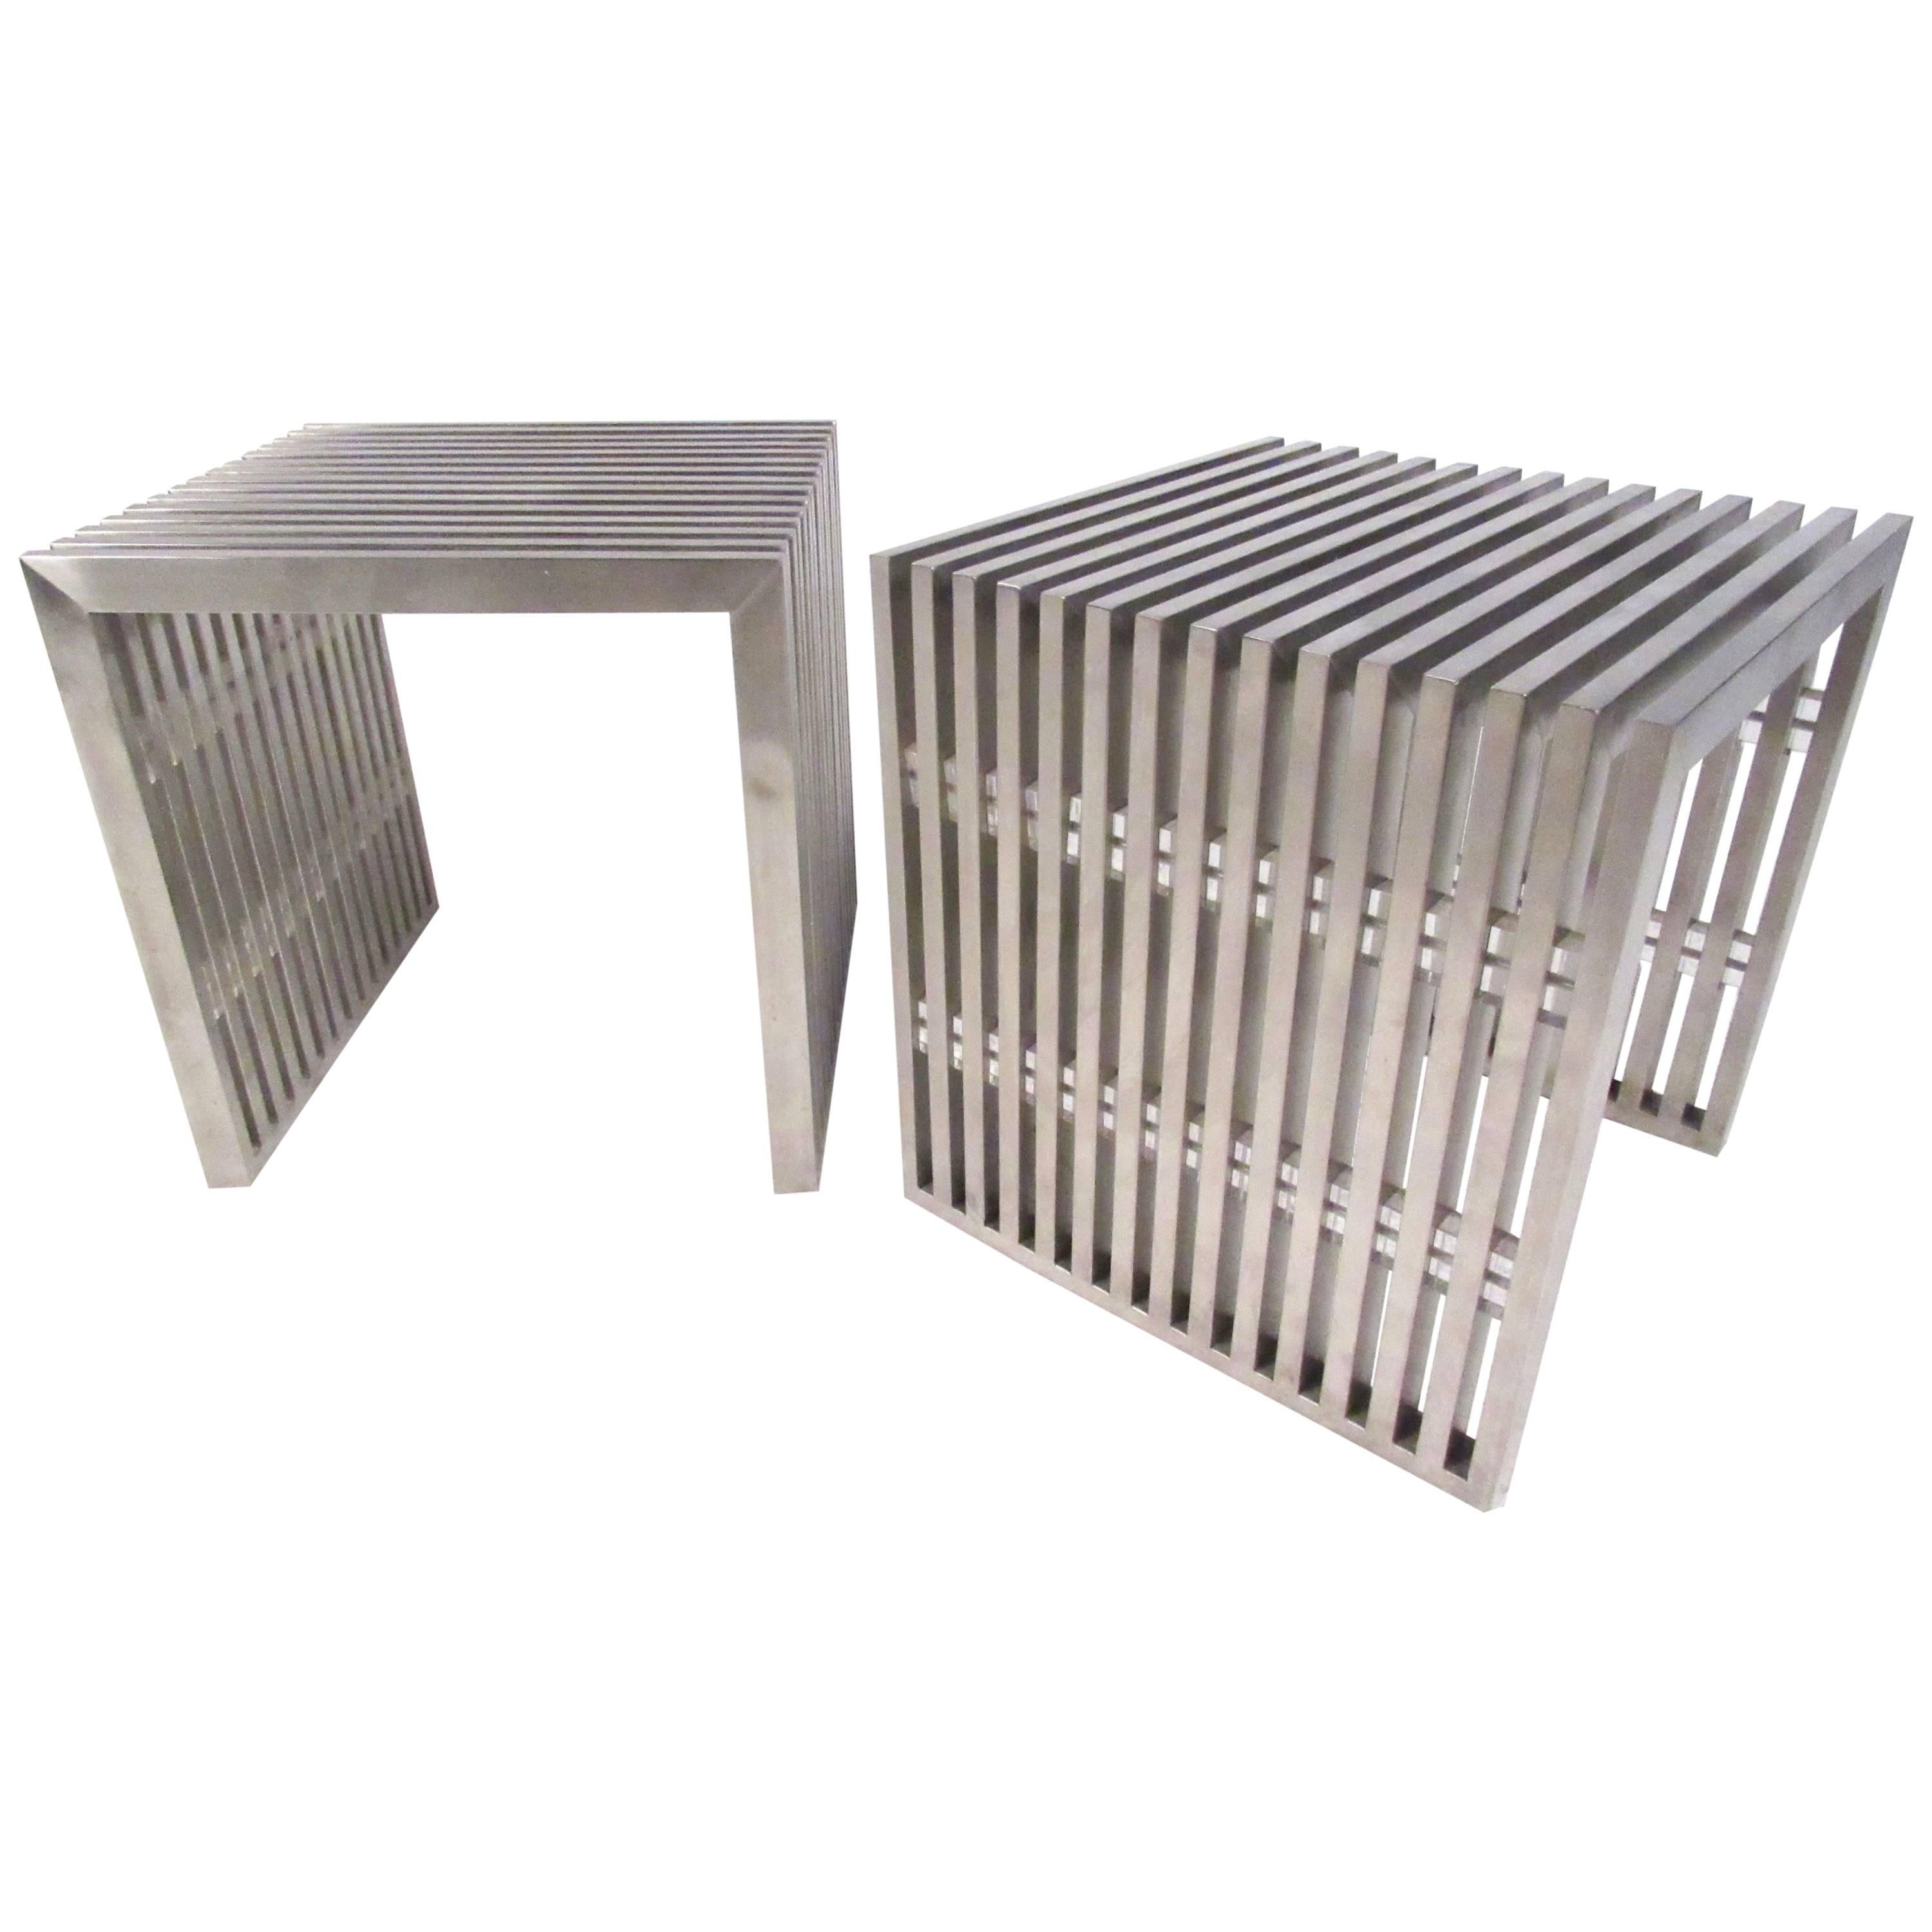 This exquisite pair of Mid-Century Modern style chrome slat side tables feature heavy construction with Lucite spacers. Style of Milo Baughman design makes this unique pair an impressive addition to any interior as side tables or occasional benches.